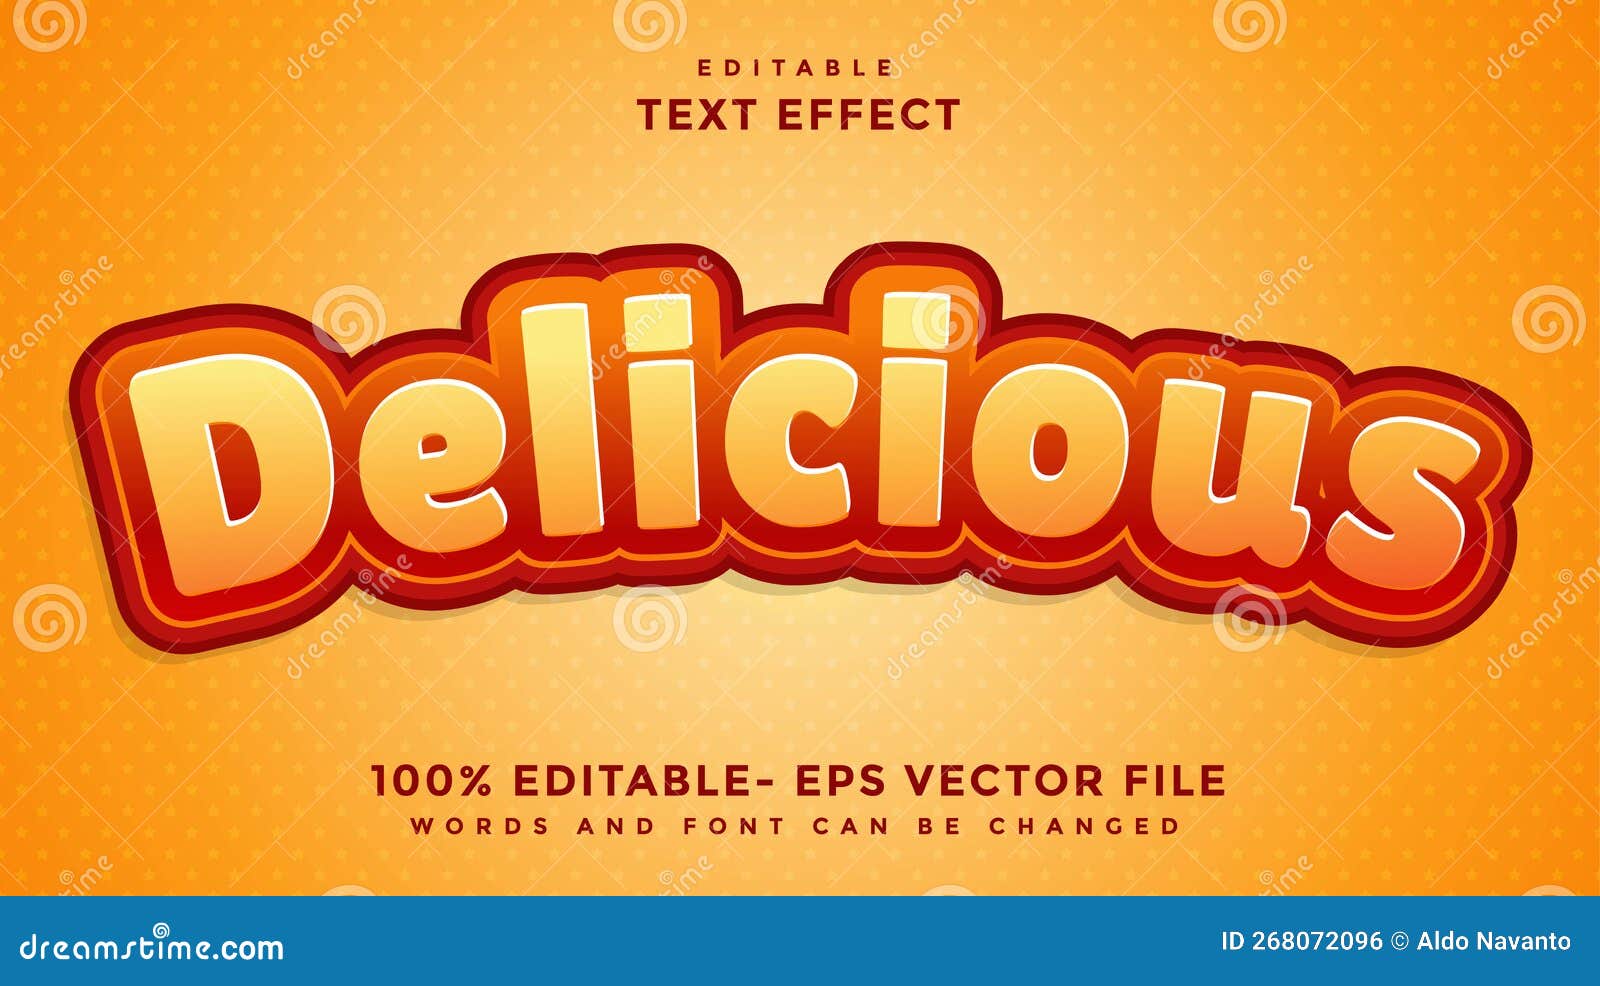 the word delicious